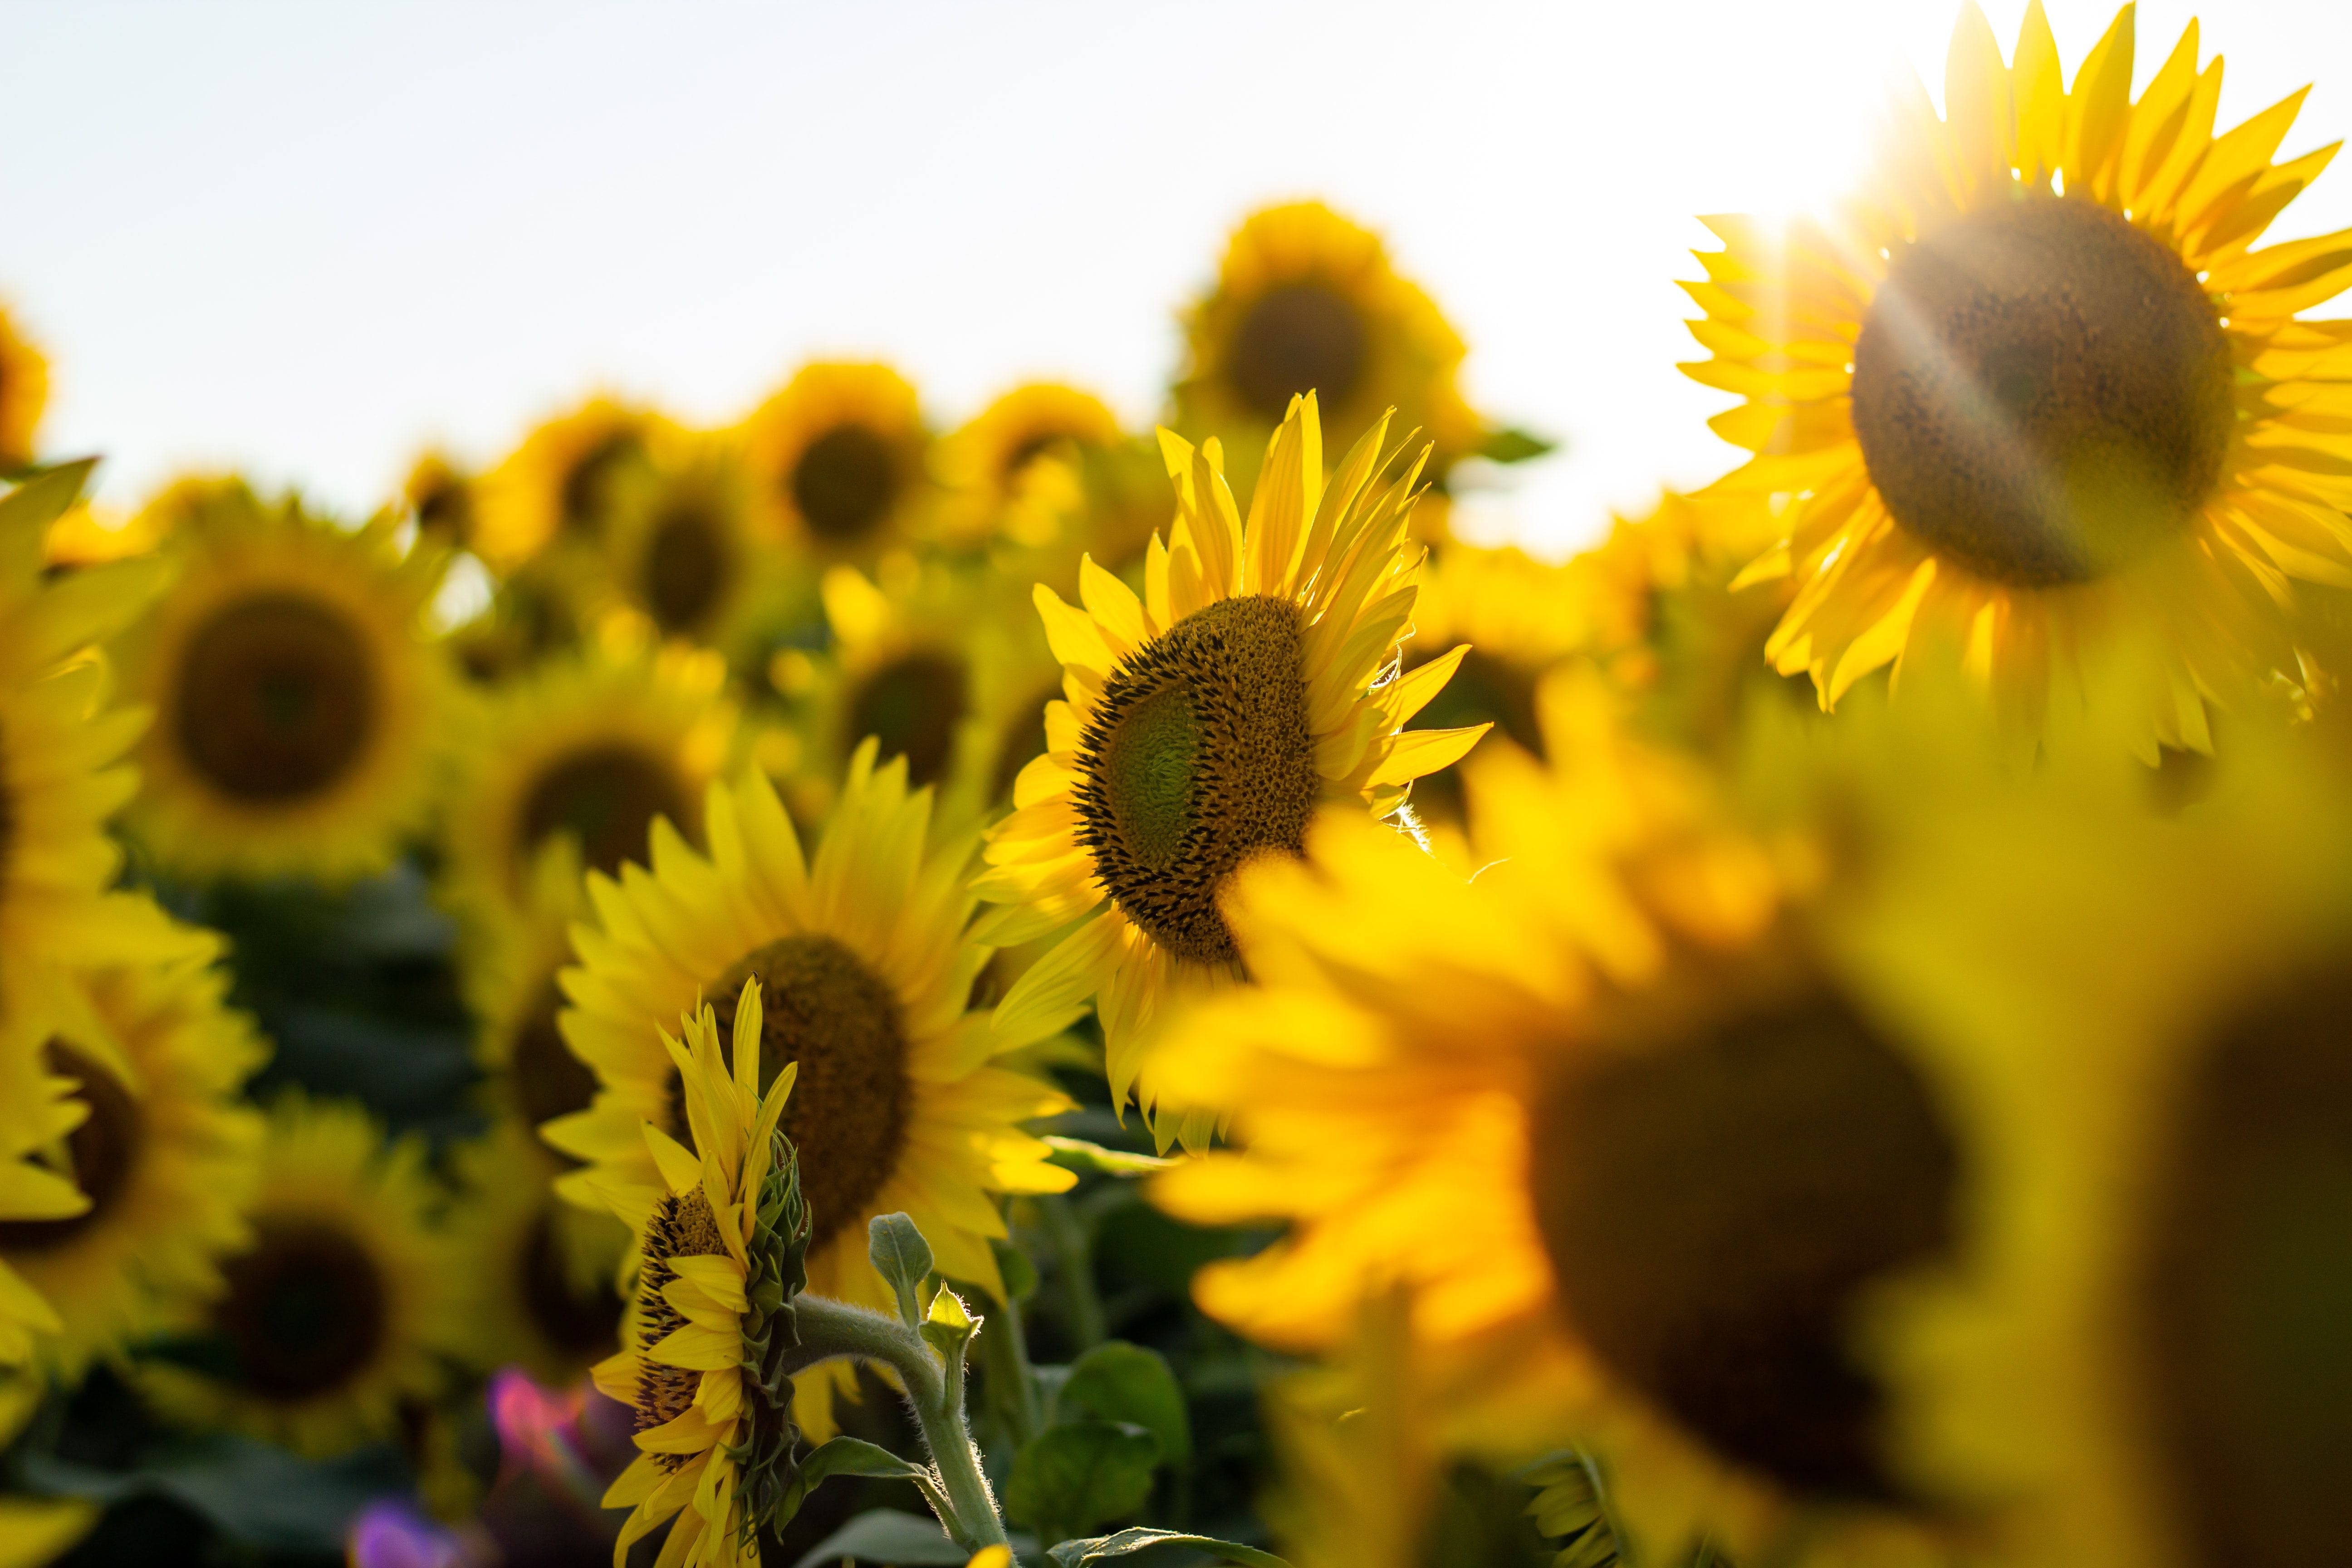 Sunflowers 4K wallpaper for your desktop or mobile screen free and easy to download